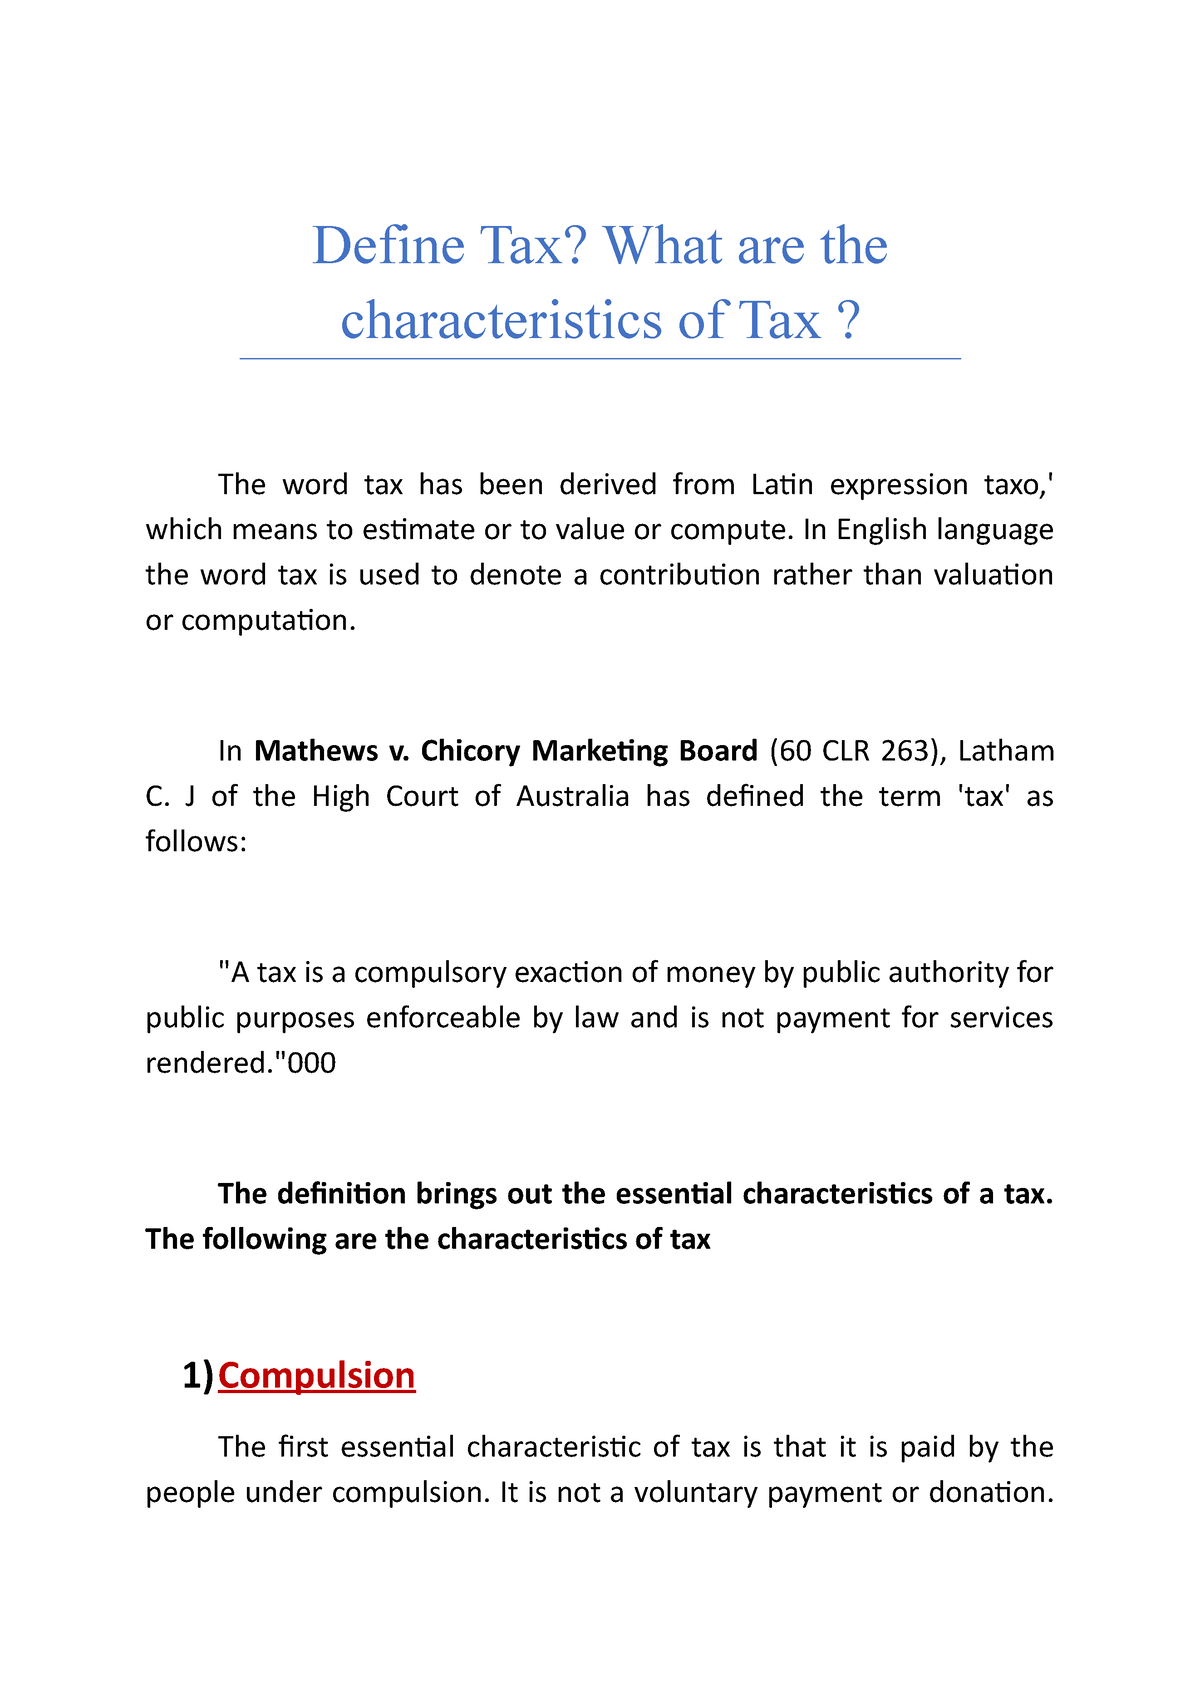 define-tax-what-are-the-characteristics-of-tax-define-tax-what-are